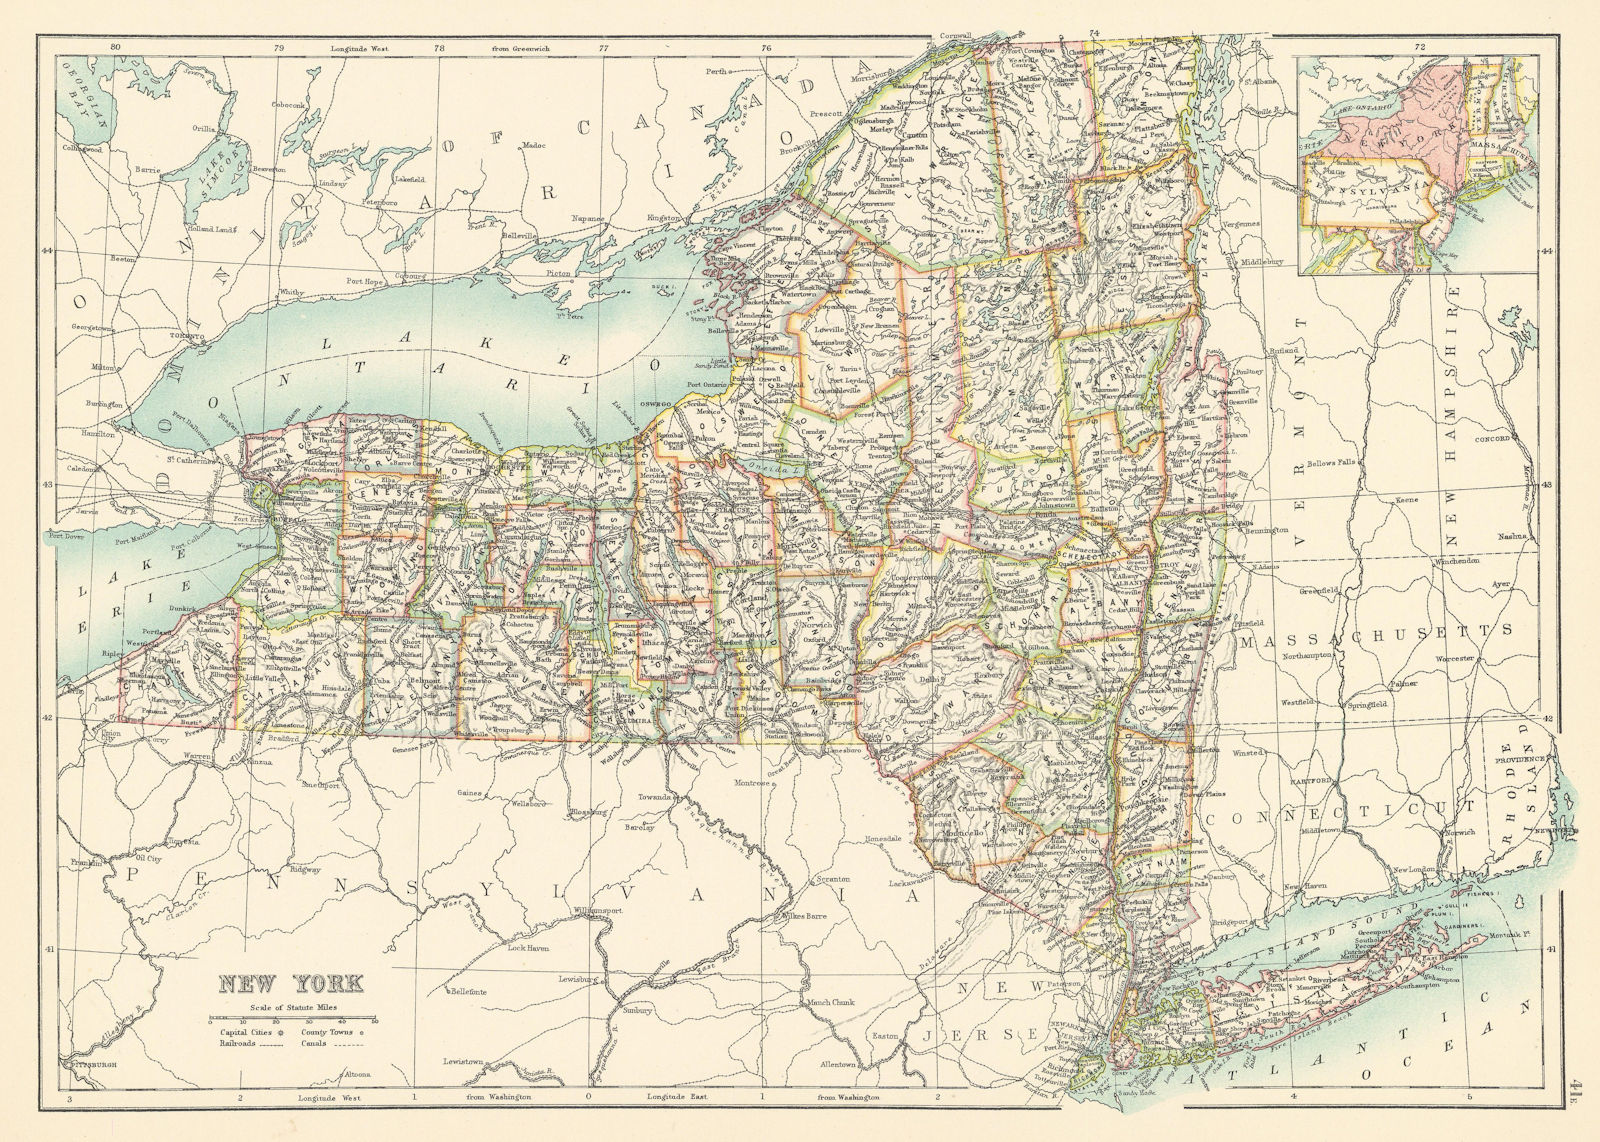 Associate Product New York state map showing counties. BARTHOLOMEW 1898 old antique chart